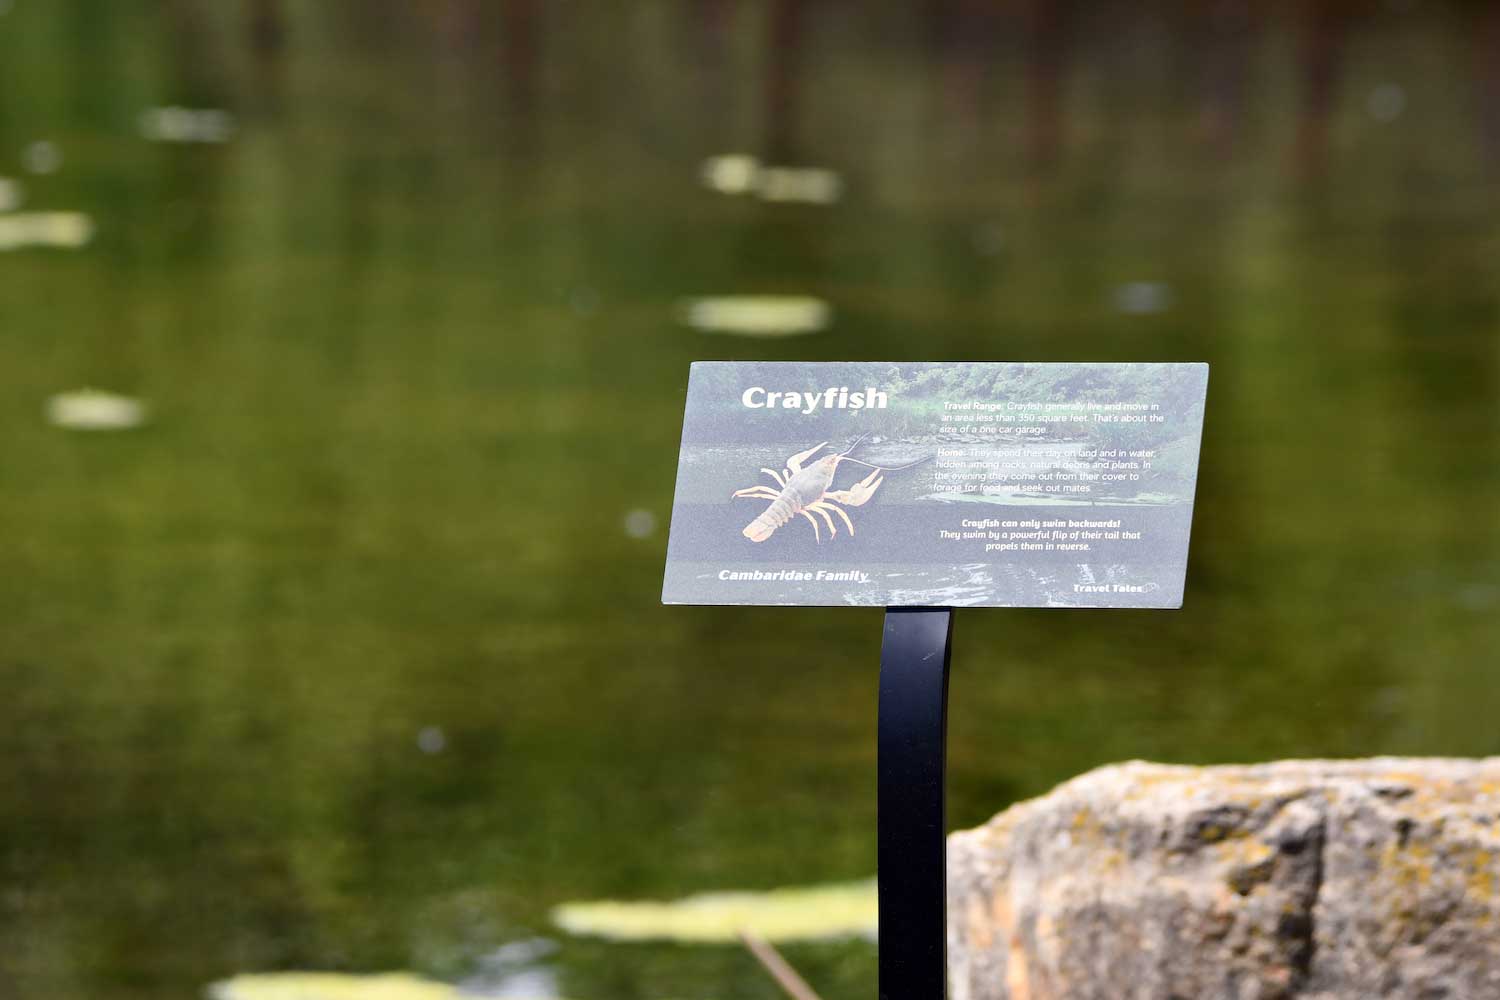 An interpretive sign posted in front of a pond.